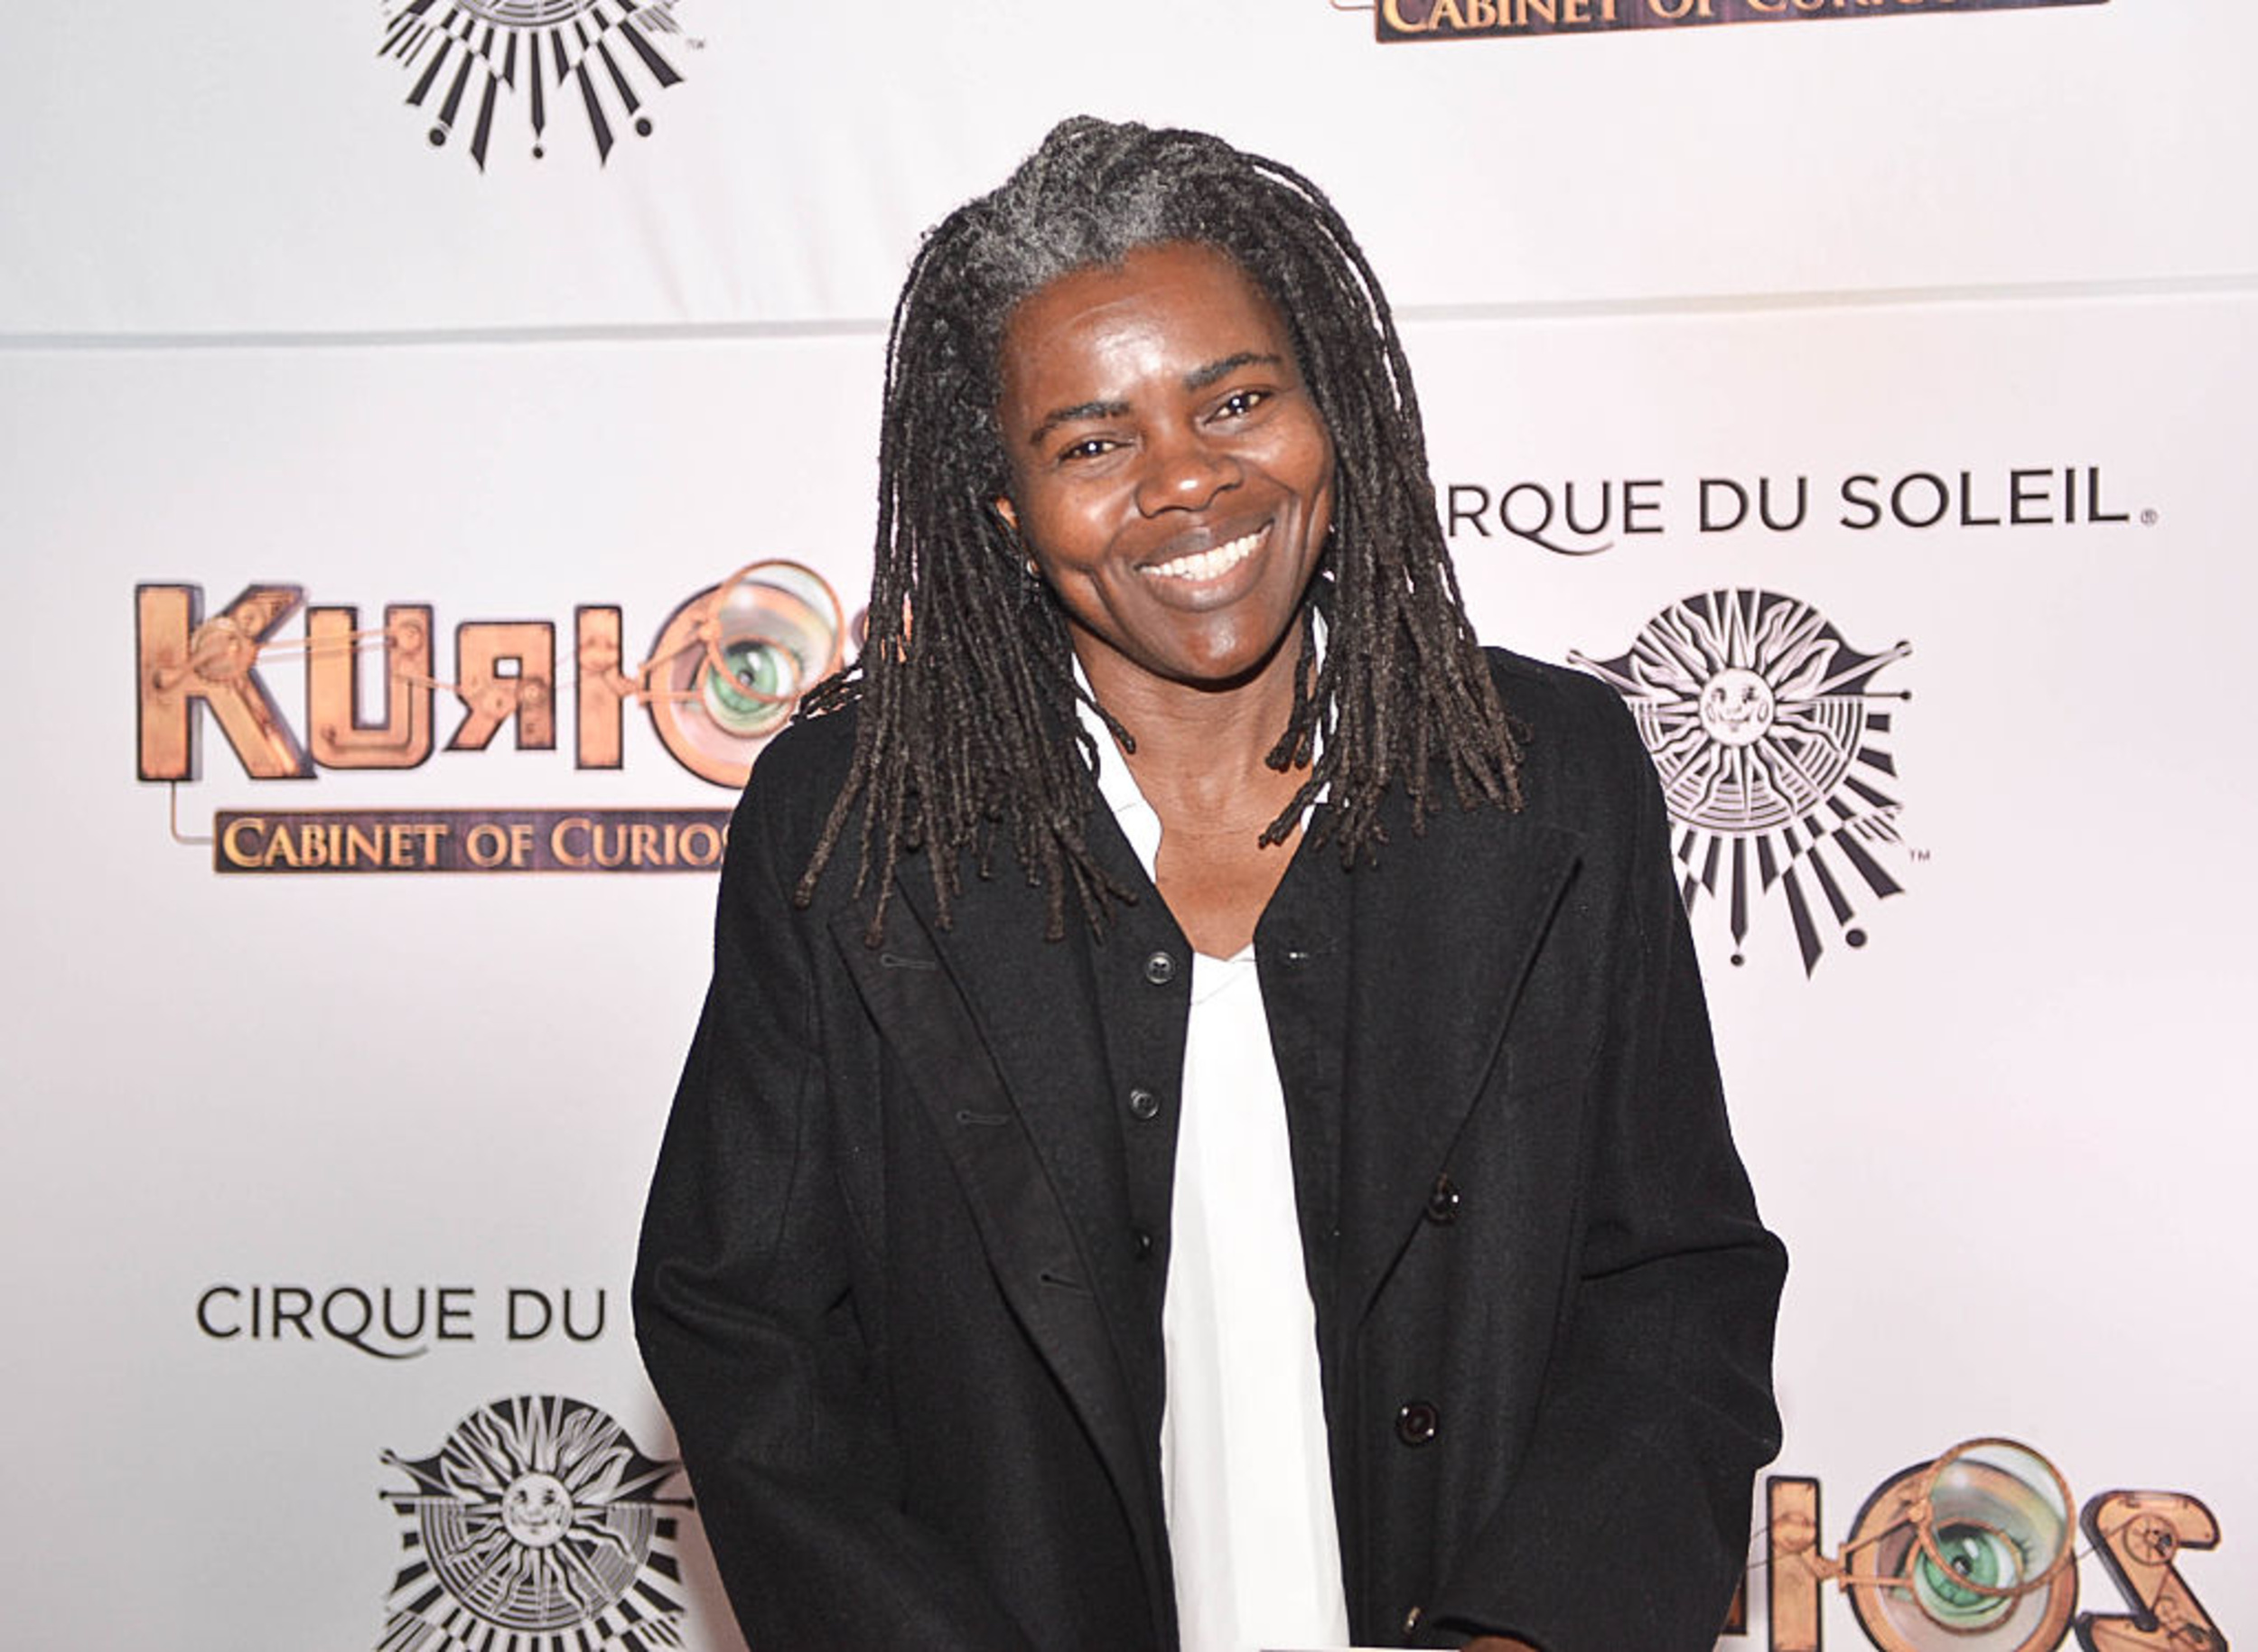 <p>Tracy Chapman’s 1998 single <a href="https://www.youtube.com/watch?v=AIOAlaACuv4" rel="noopener noreferrer">“Fast Car”</a> tells the story of a couple ready to start a new life. The couple has worked hard and is down on their luck, so they feel that life could be better if they were just in a different place. The couple's feelings are heard as Chapman sings, “You got a fast car / Is it fast enough so we can fly away? / We gotta make a decision / Leave tonight or live and die this way.” </p><p><a href='https://www.msn.com/en-us/community/channel/vid-cj9pqbr0vn9in2b6ddcd8sfgpfq6x6utp44fssrv6mc2gtybw0us'>Follow us on MSN to see more of our exclusive entertainment content.</a></p>